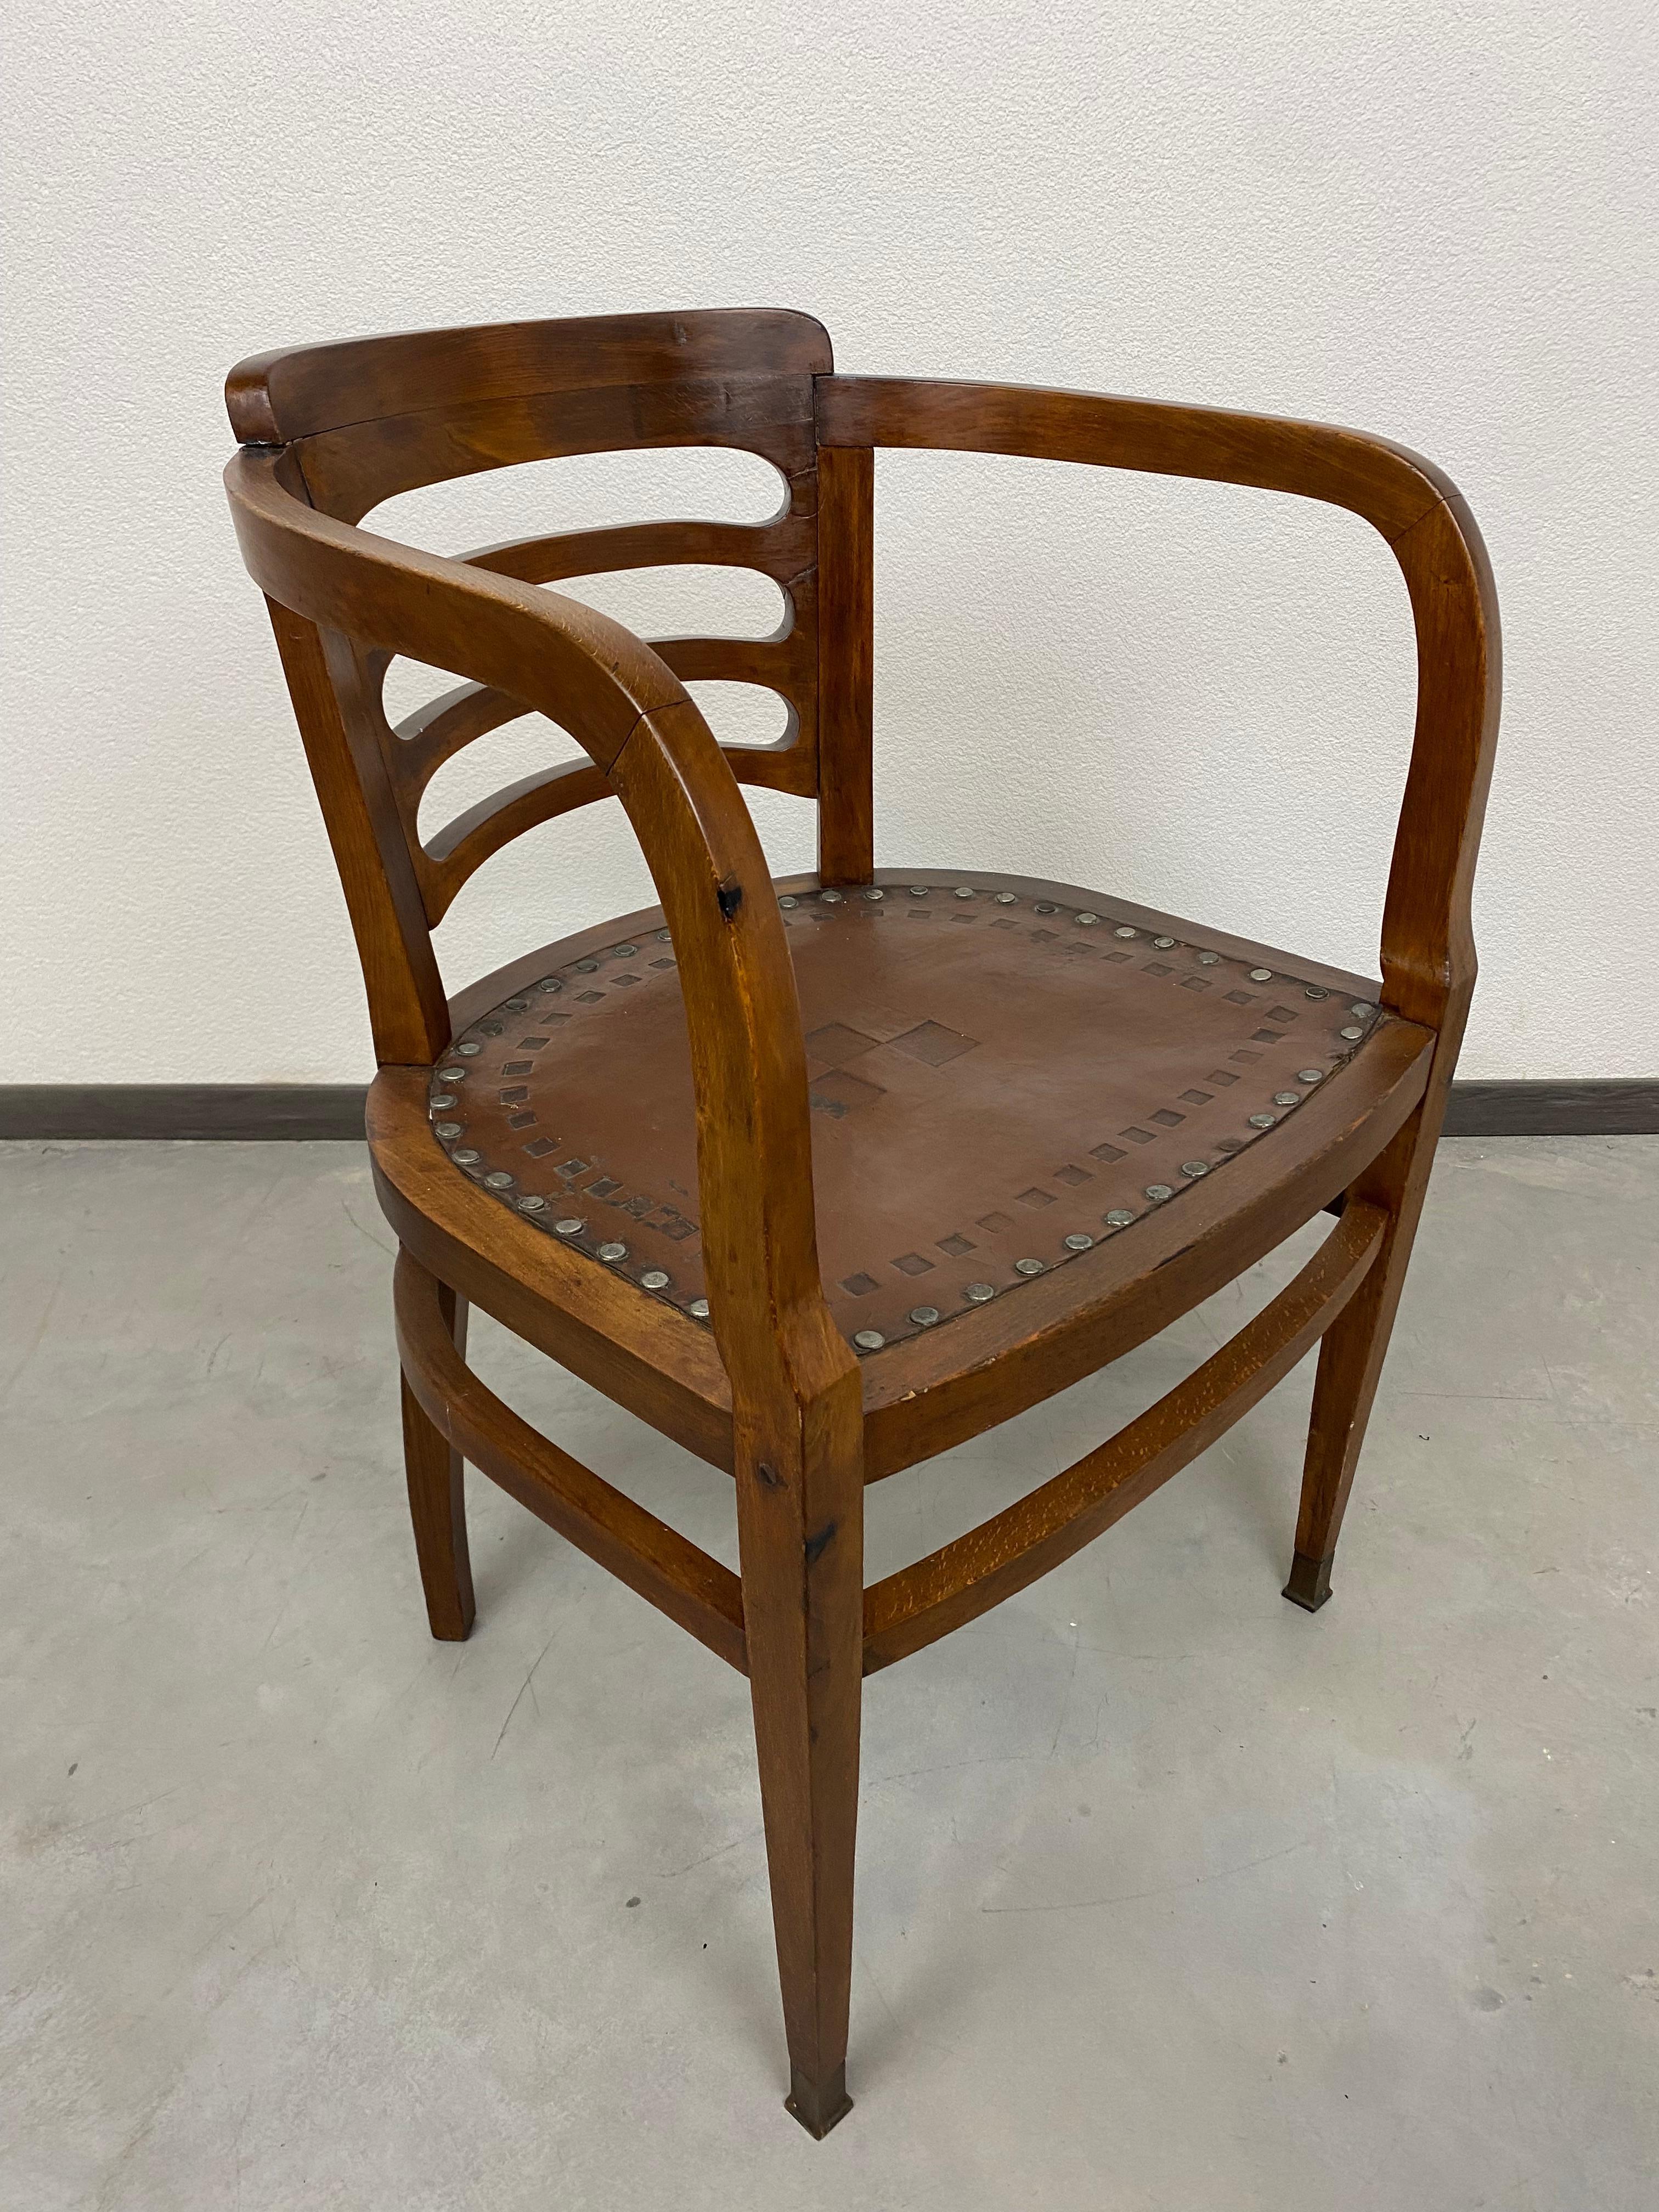 Secession office chair by Joseph Maria Olbrich in very good original condition with leather seat and copper leg endings.